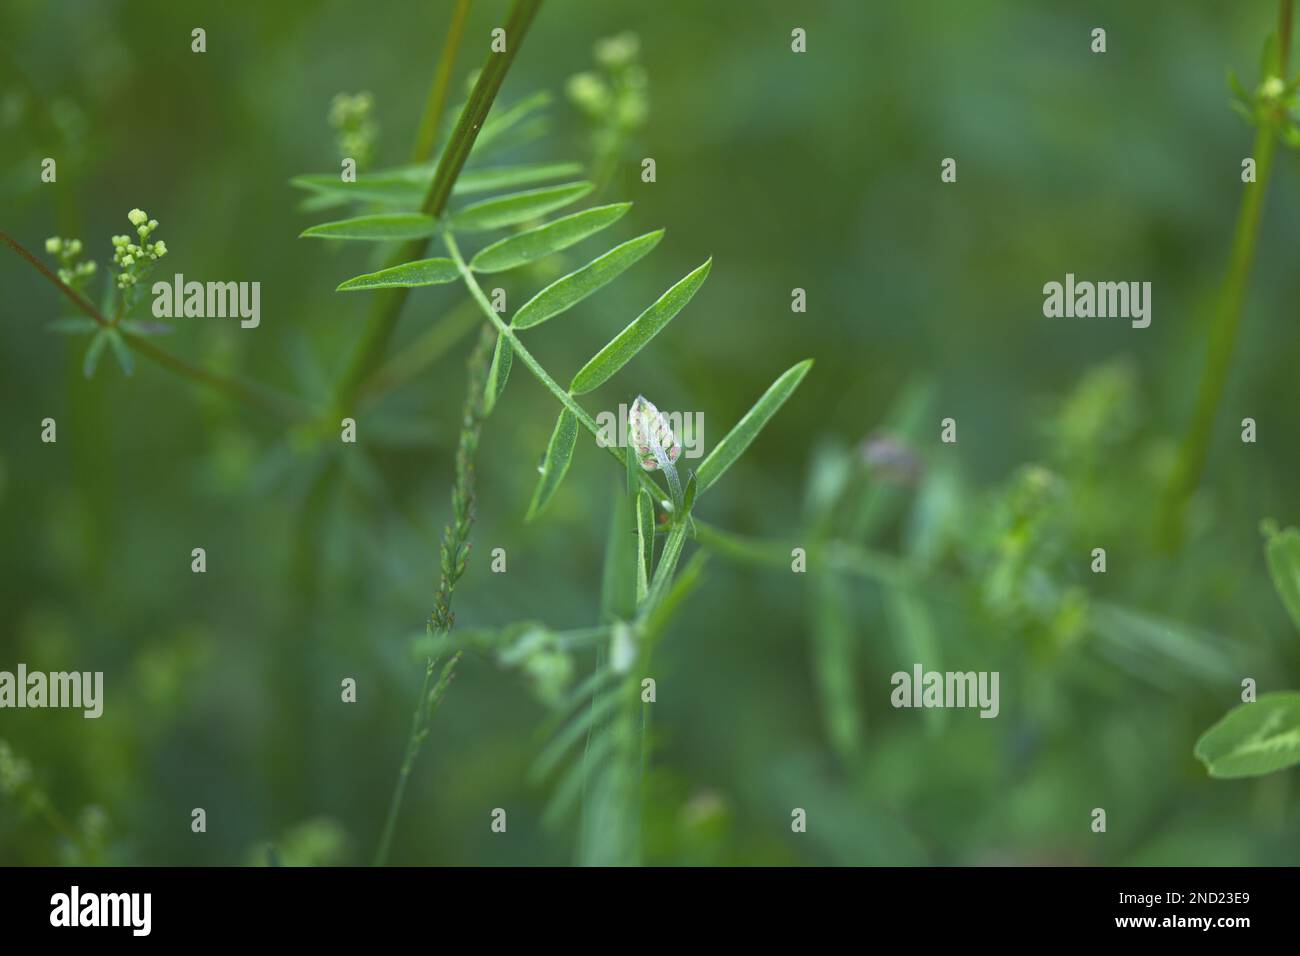 The close-up view of Vicia hirsuta plants growing in the greenery Stock Photo